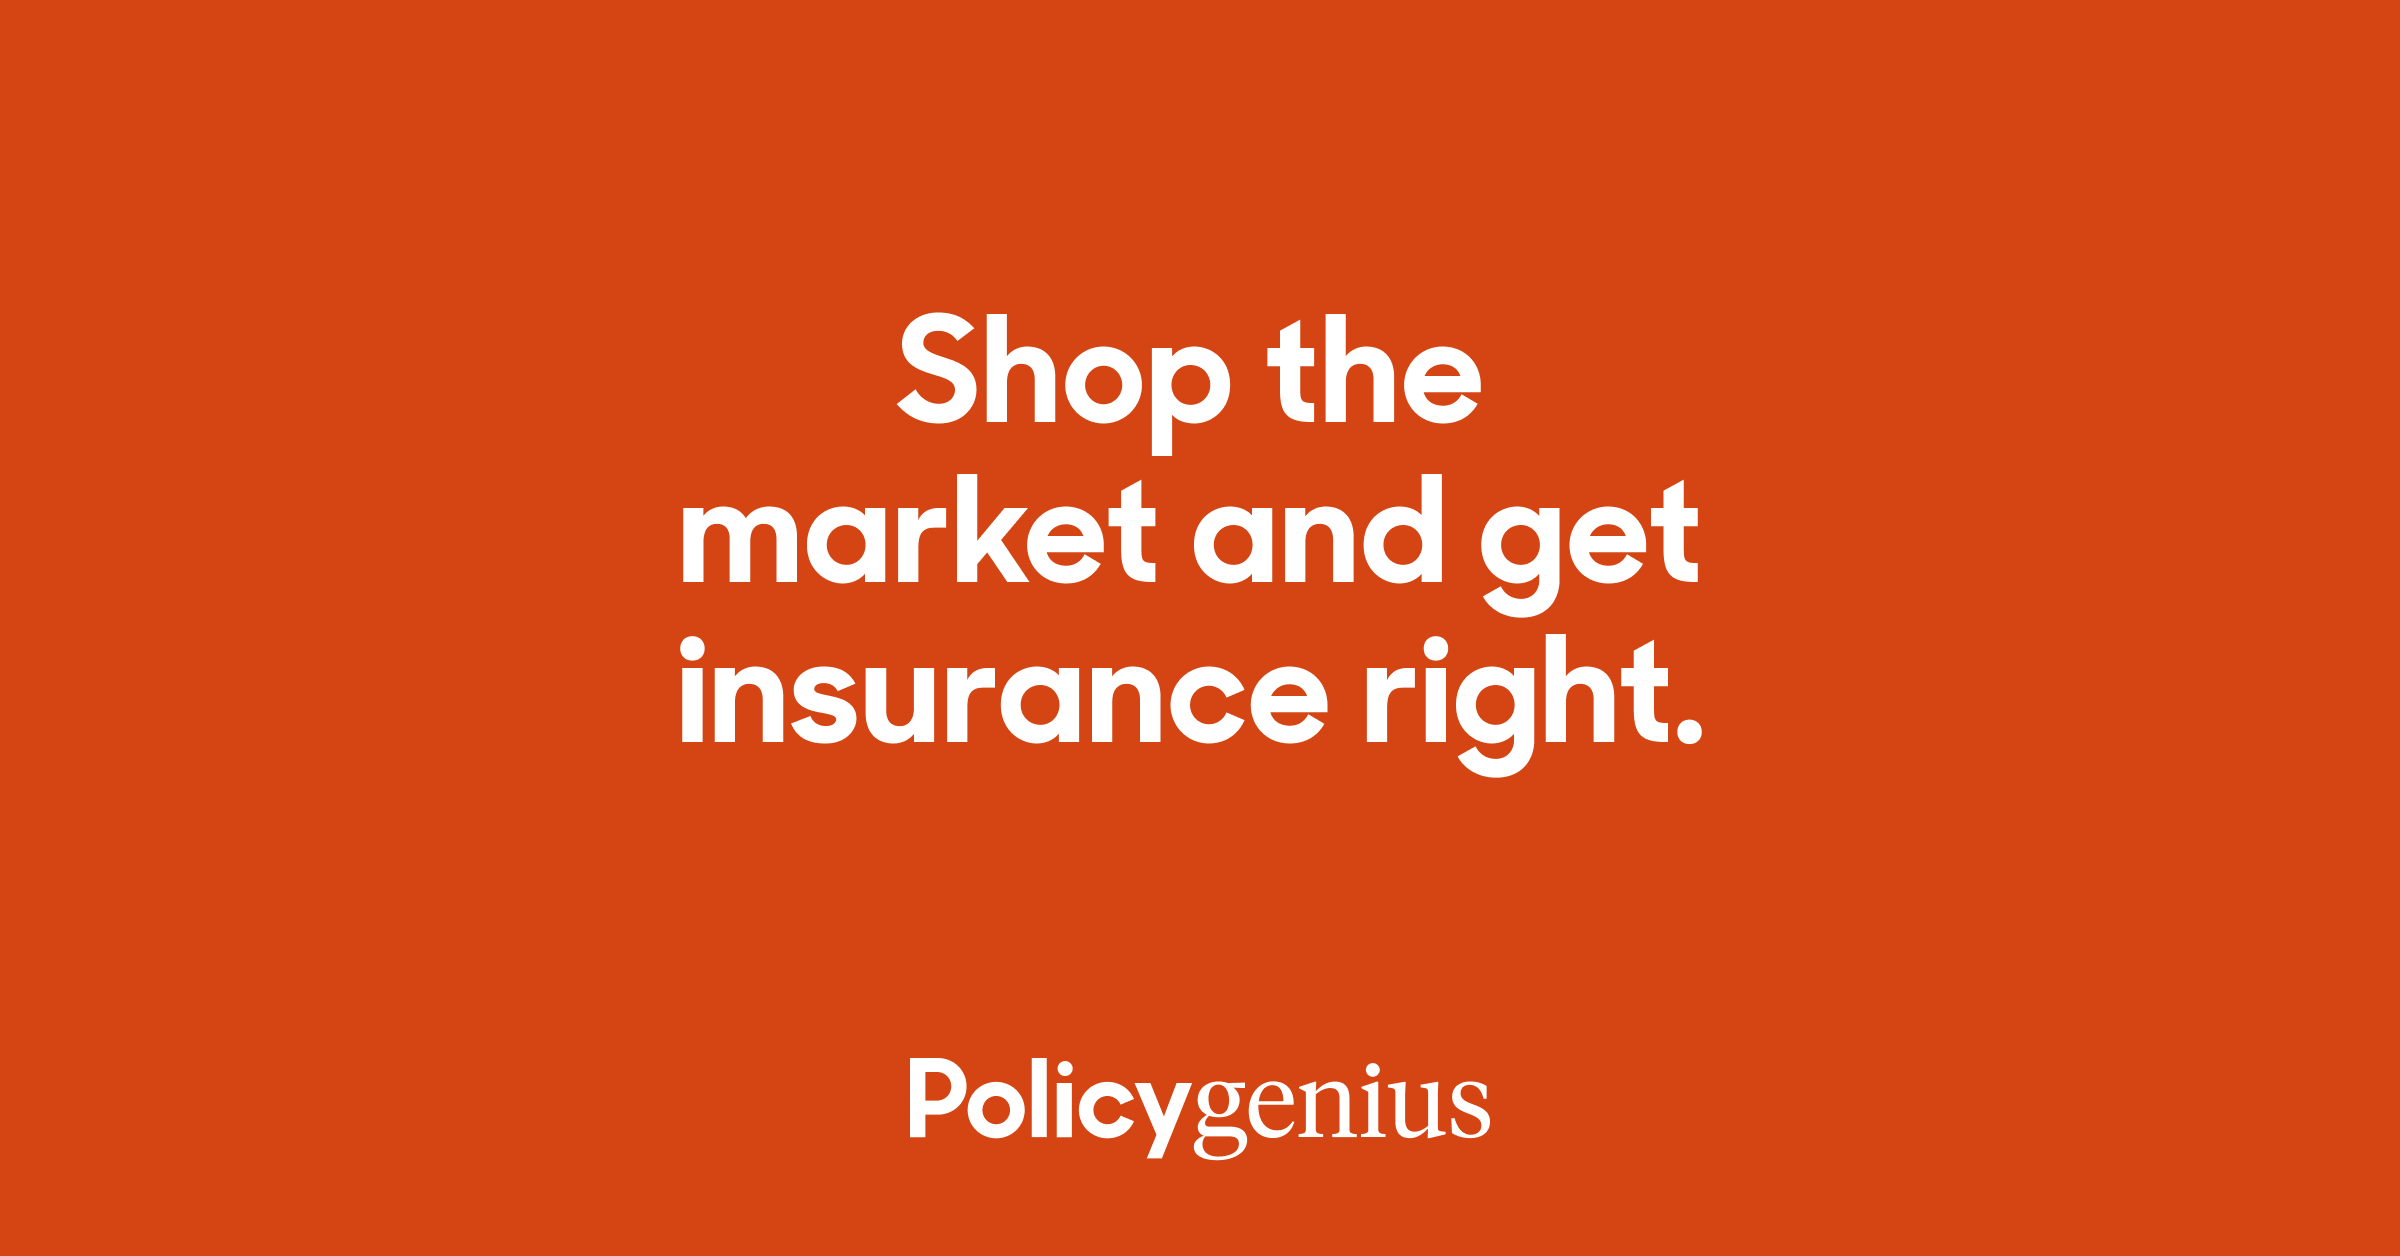 Life Insurance: Compare Policies & Free Quotes - Policygenius